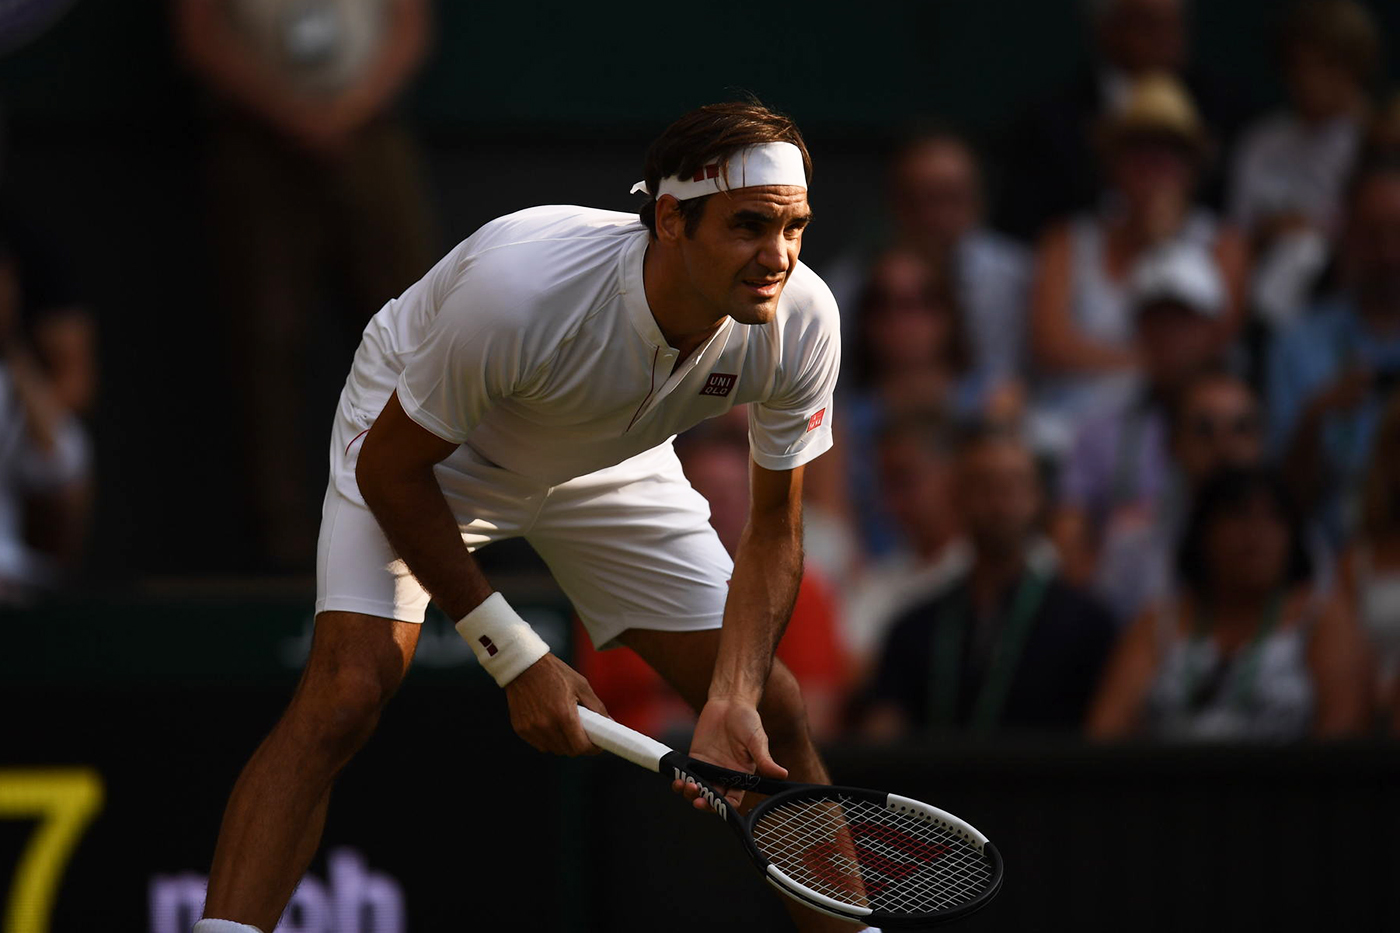 Federer Moves Past Stuff into Wimbledon Fourth Round